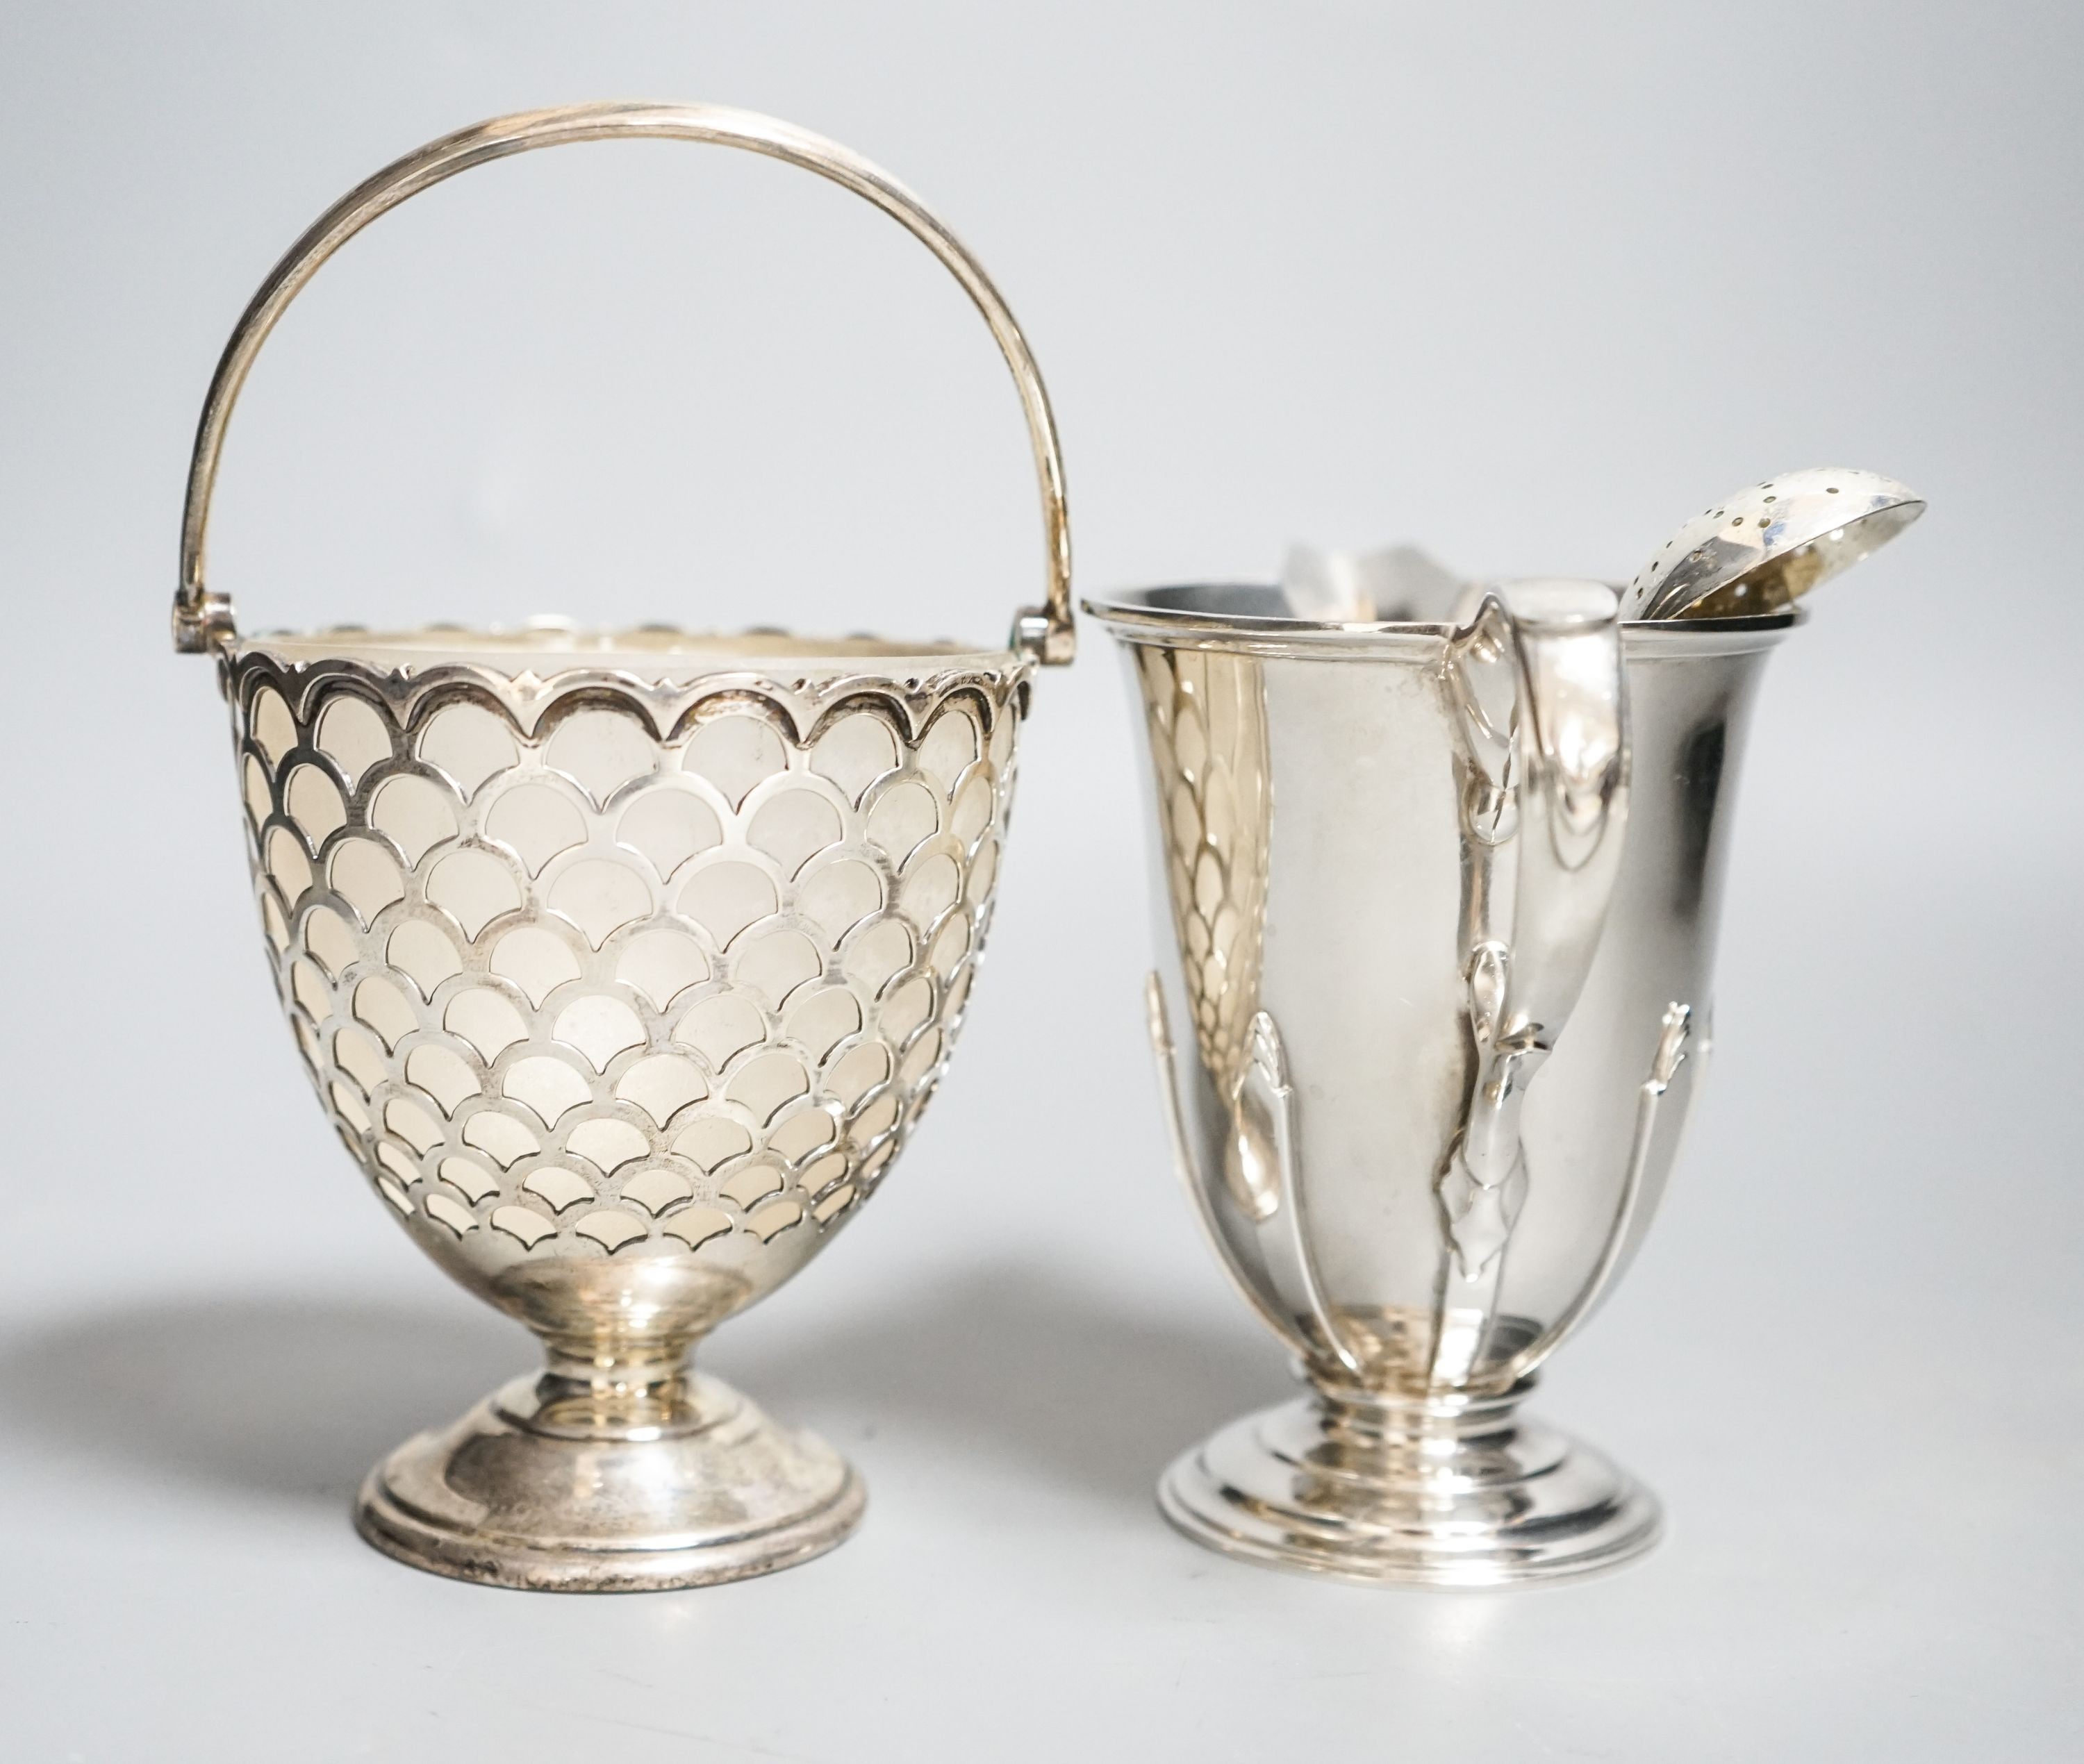 A modern silver sugar basket and sifter spoons, with glass liner by Mappin & Webb, 9.8cm and an earlier silver cream jug by William Comyns & Sons Ltd.